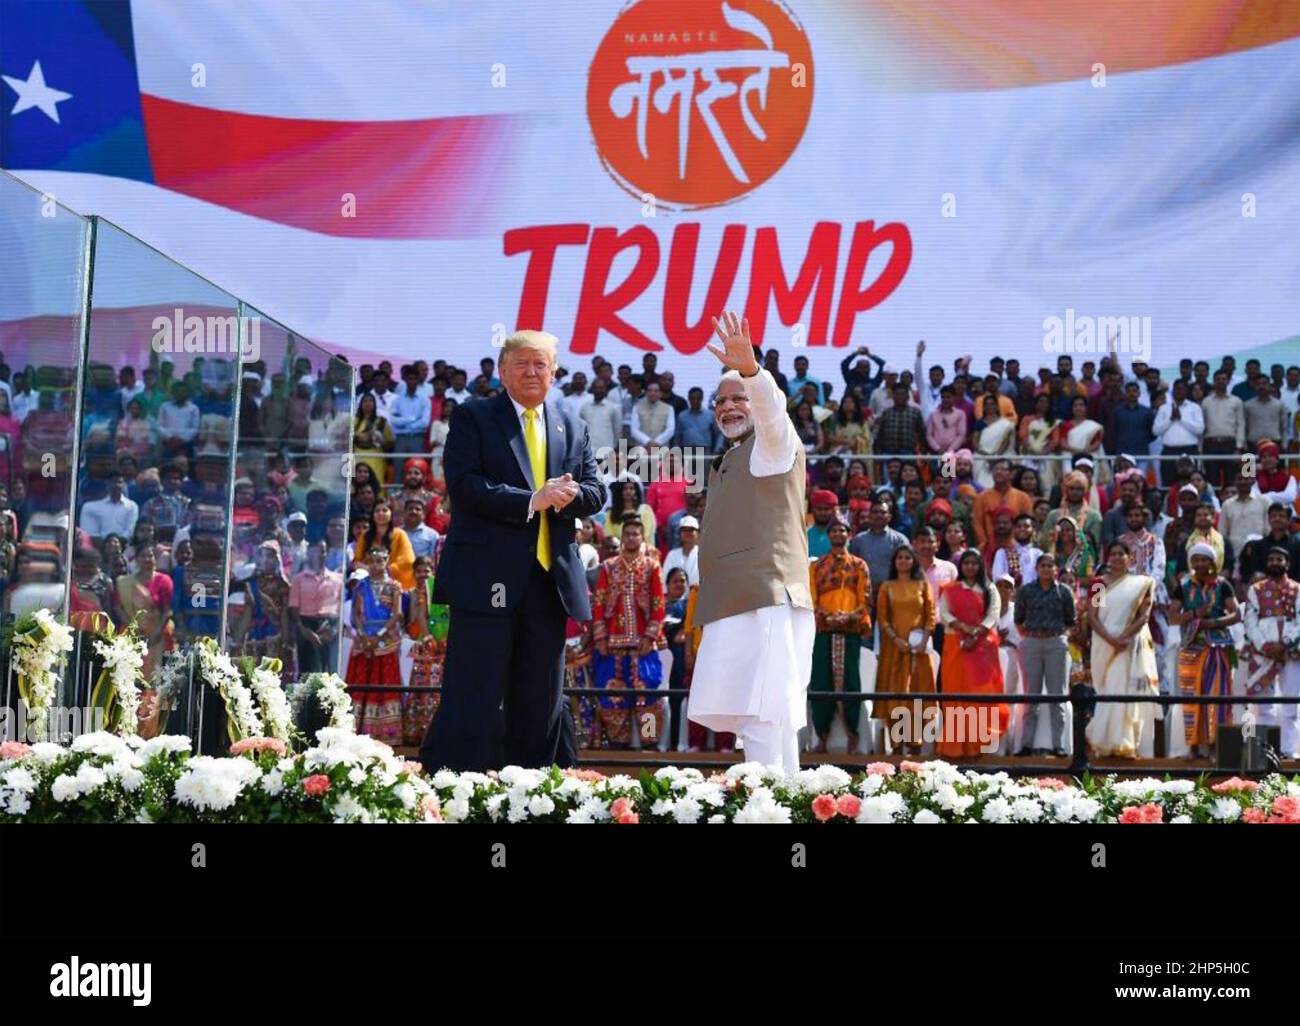 US PRESIDENT DONALD TRUMP at a welcome rally in Ahmedabad, India with Indian President  Narendra Modi 24 February 2020. Stock Photo